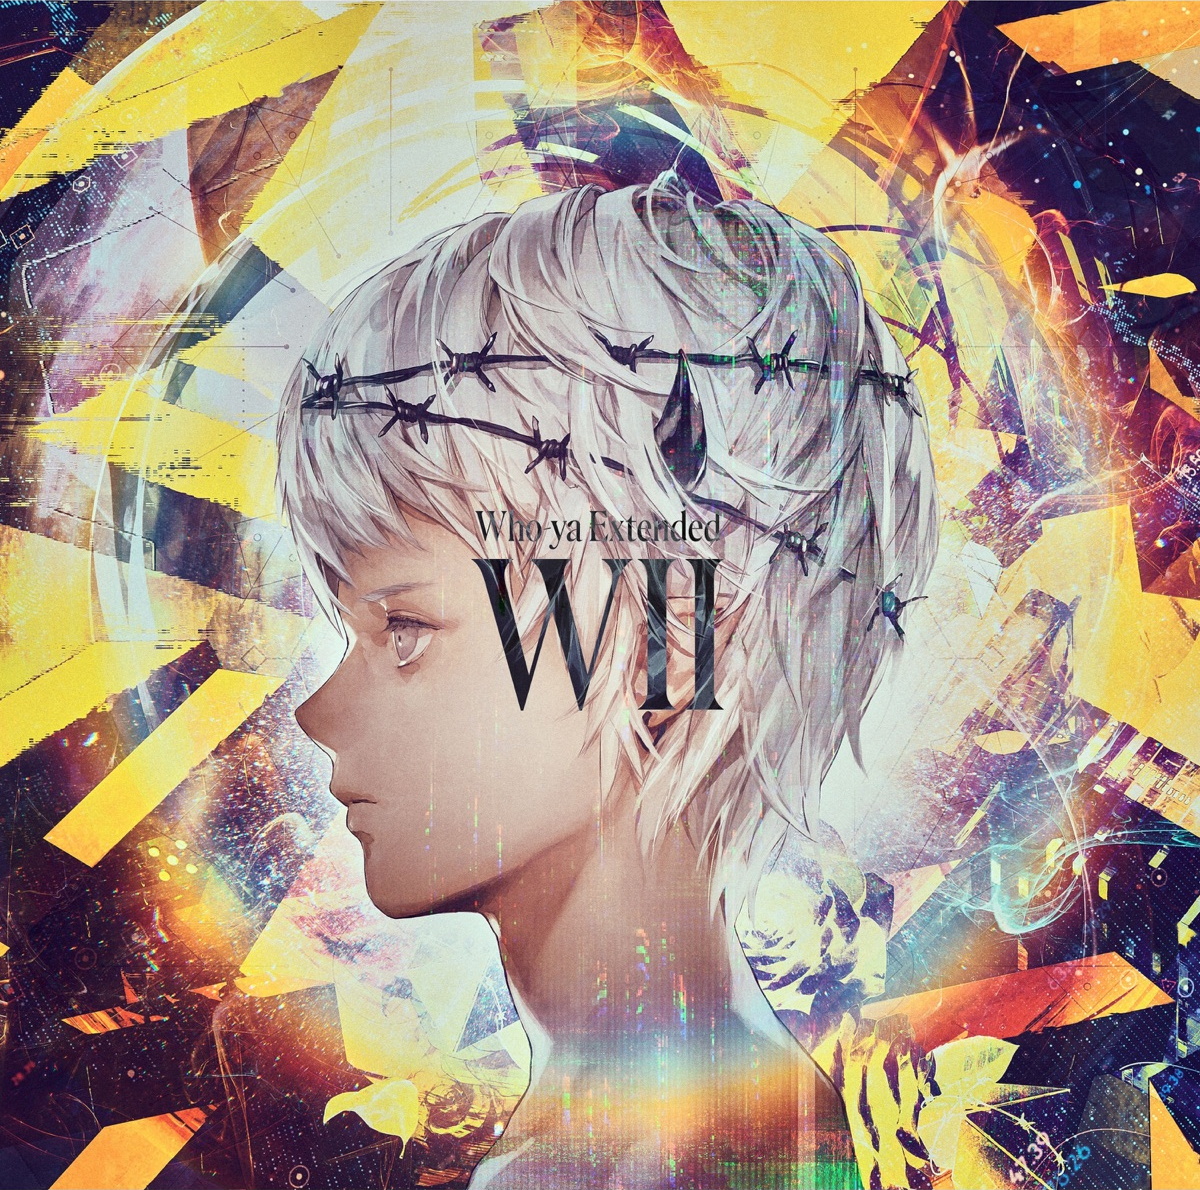 Cover art for『Who-ya Extended - 透明な花』from the release『WⅡ